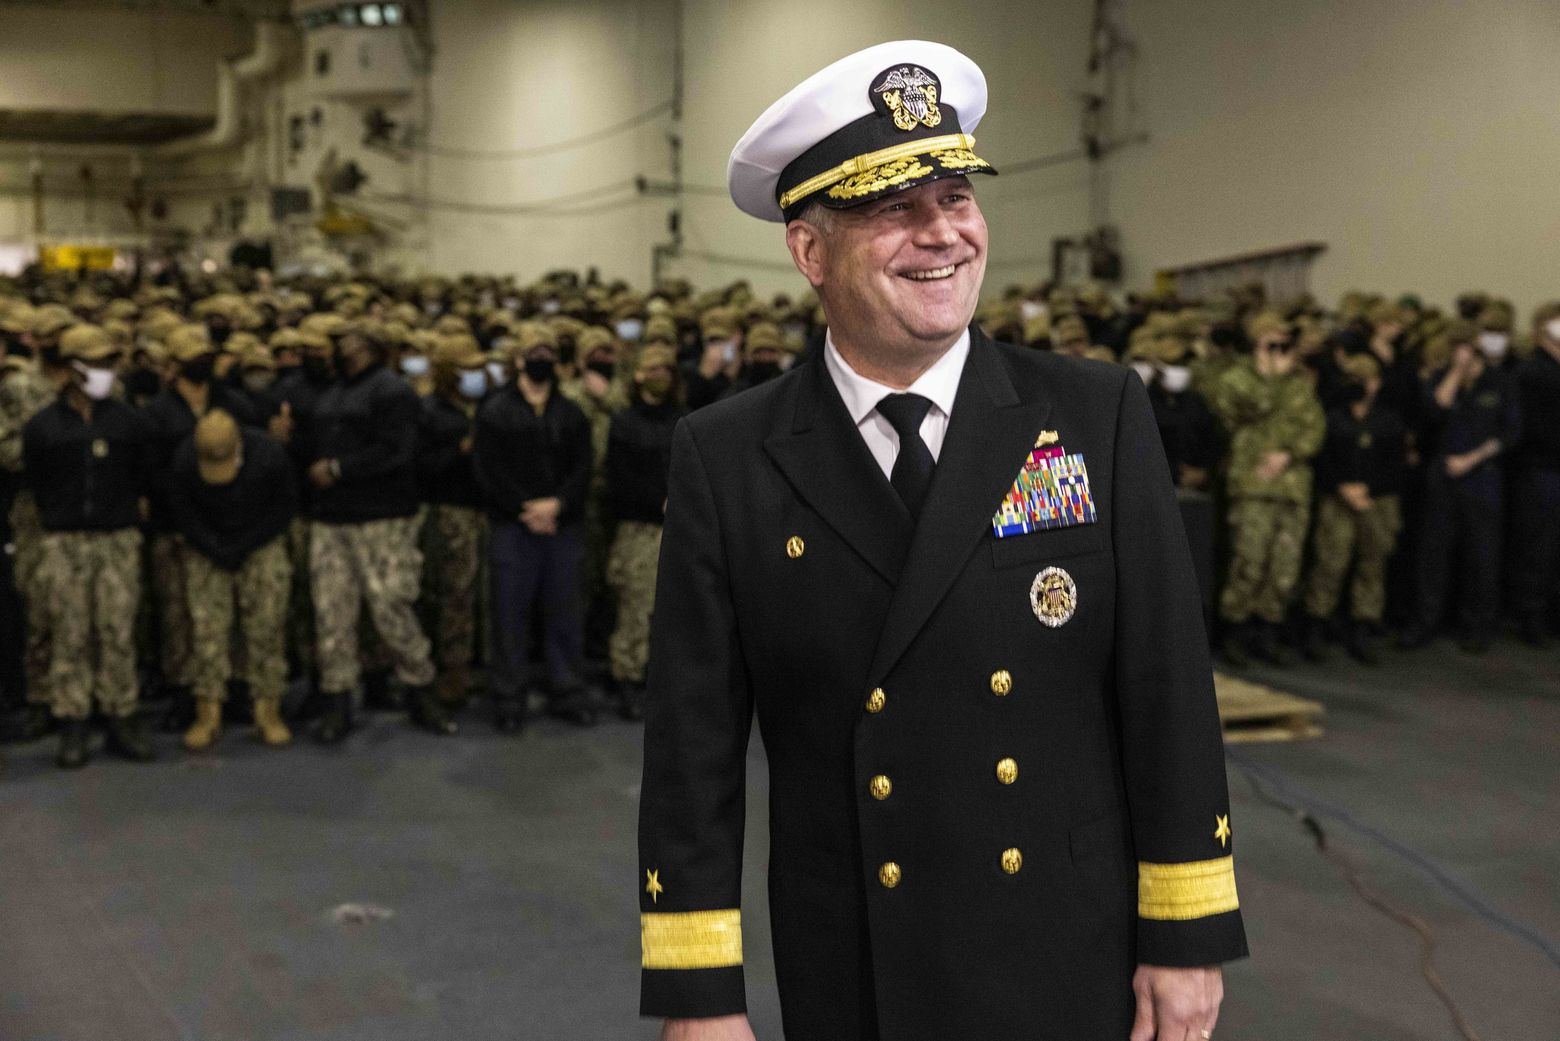 From a base in Everett, Navy Rear Admiral Christopher Sweeney ...